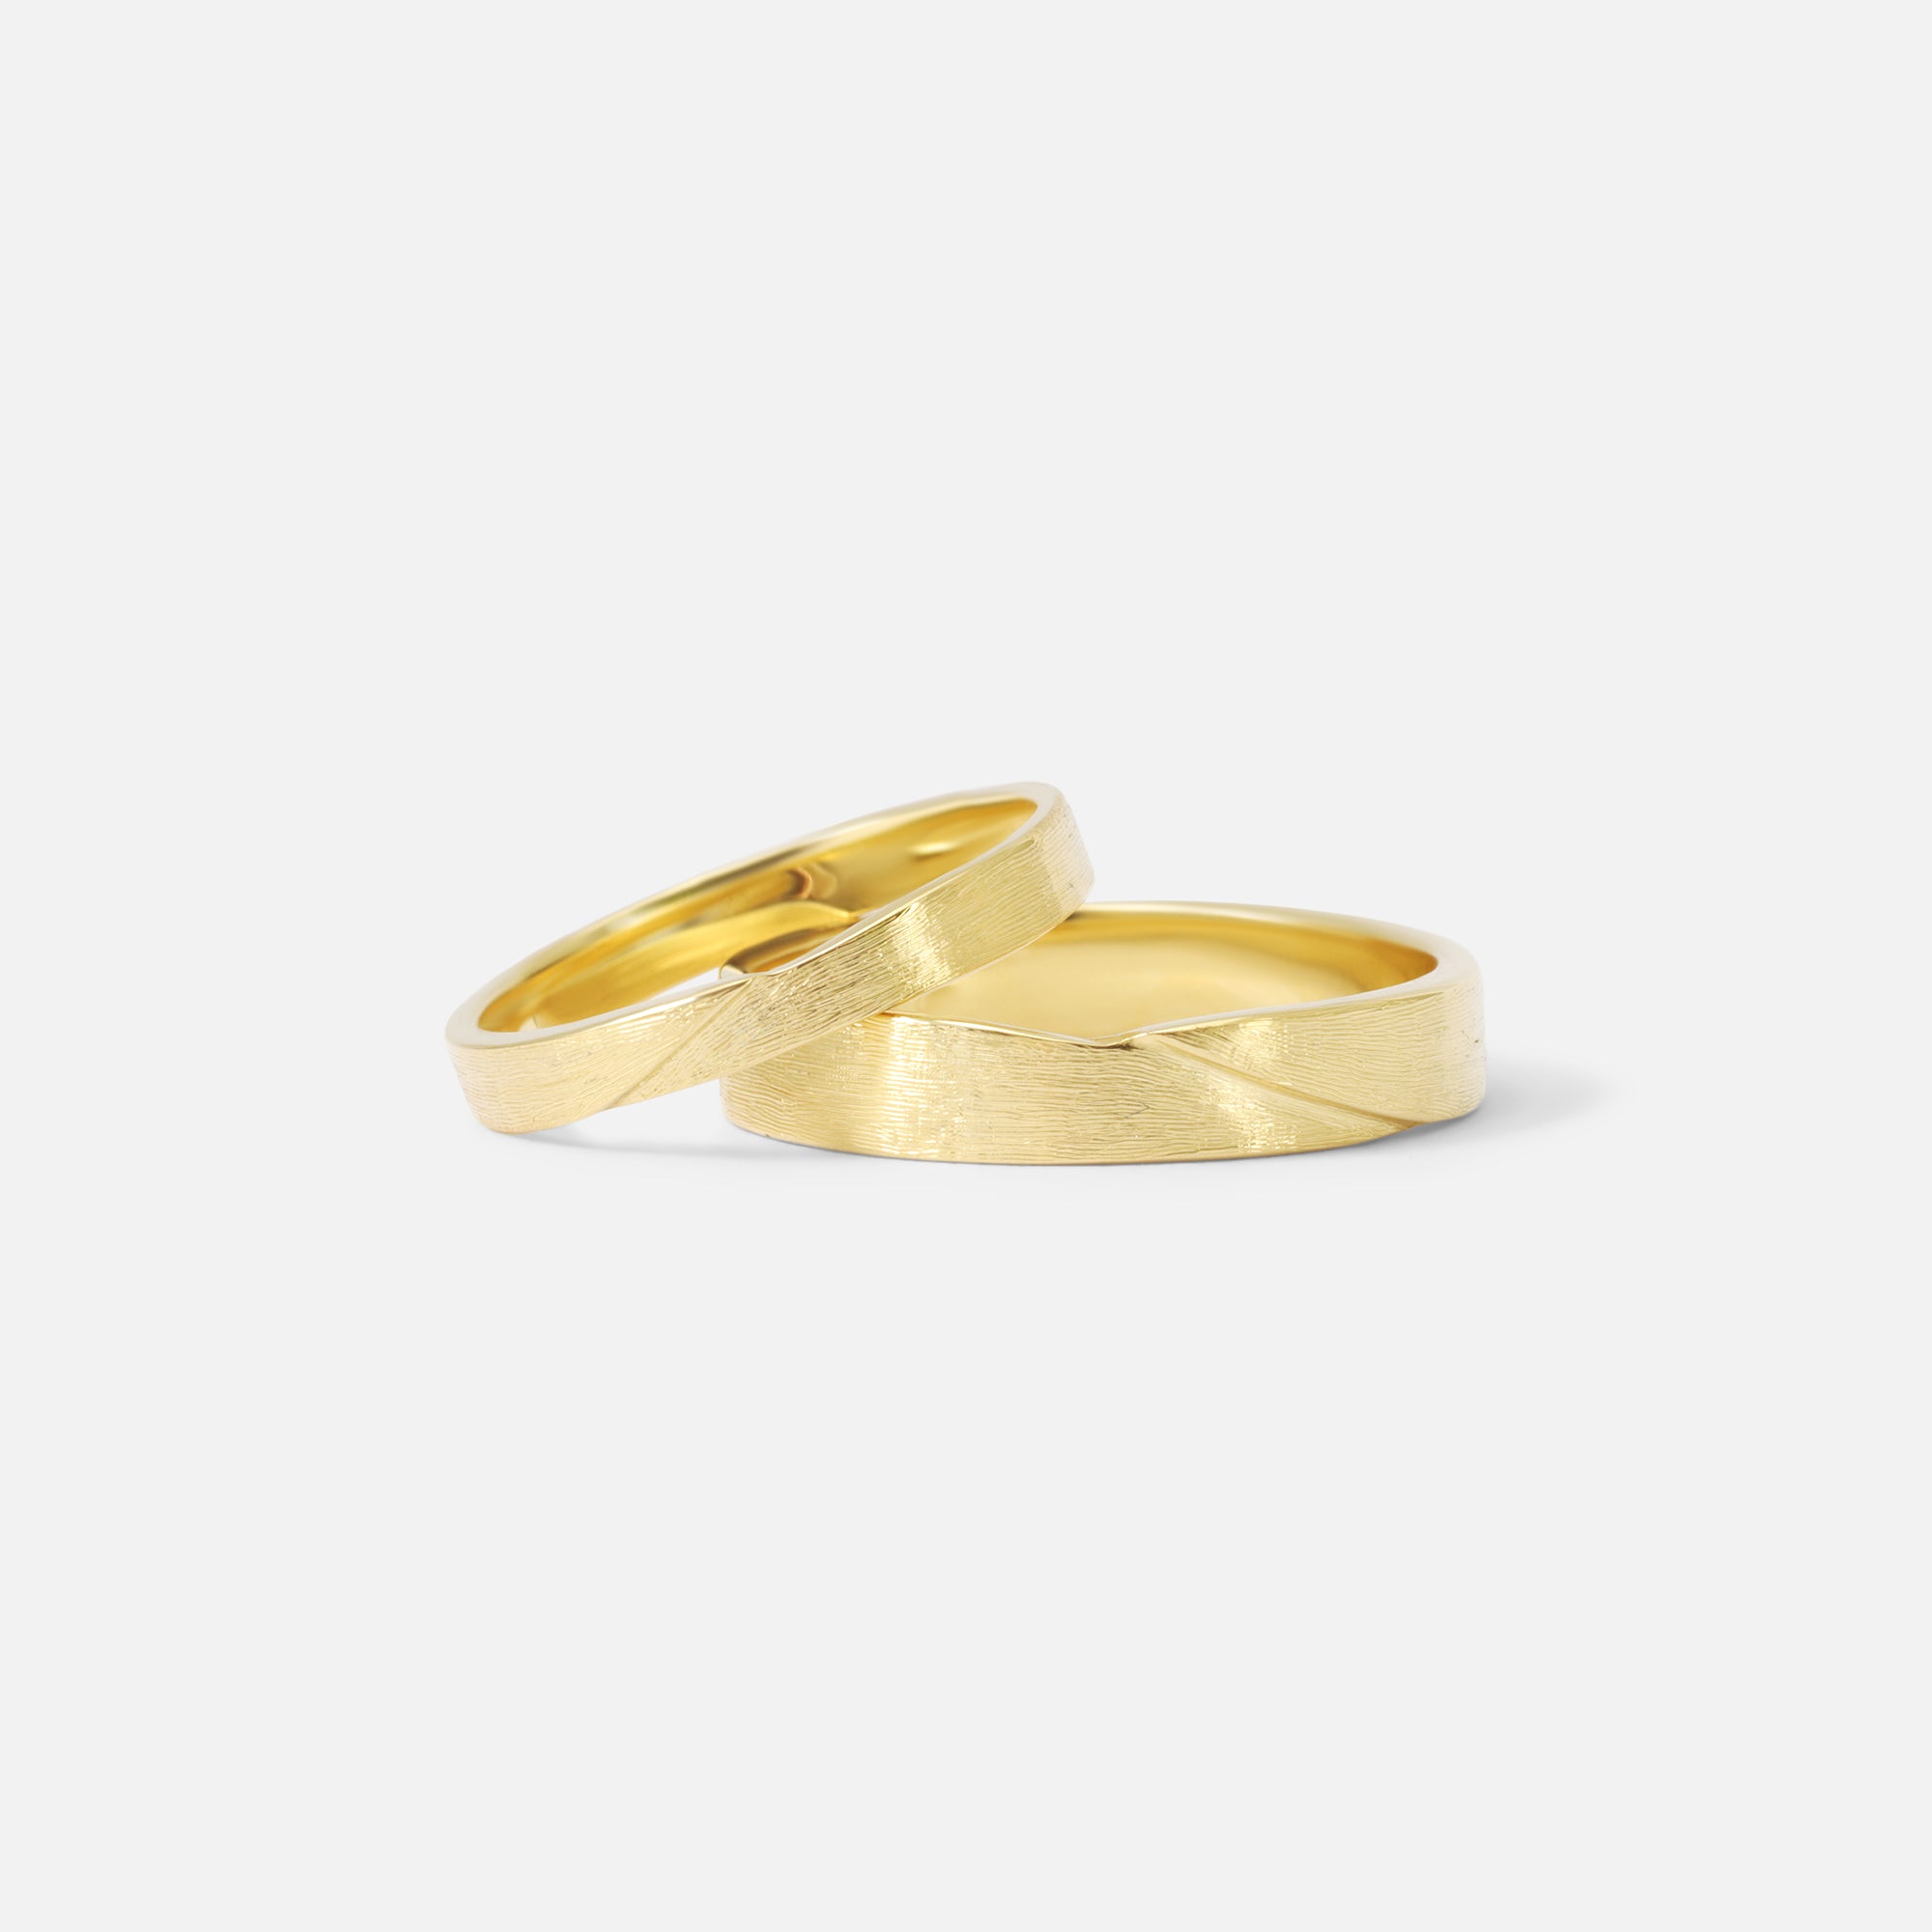 Enishi Ring / Large By Hiroyo in Wedding Bands Category